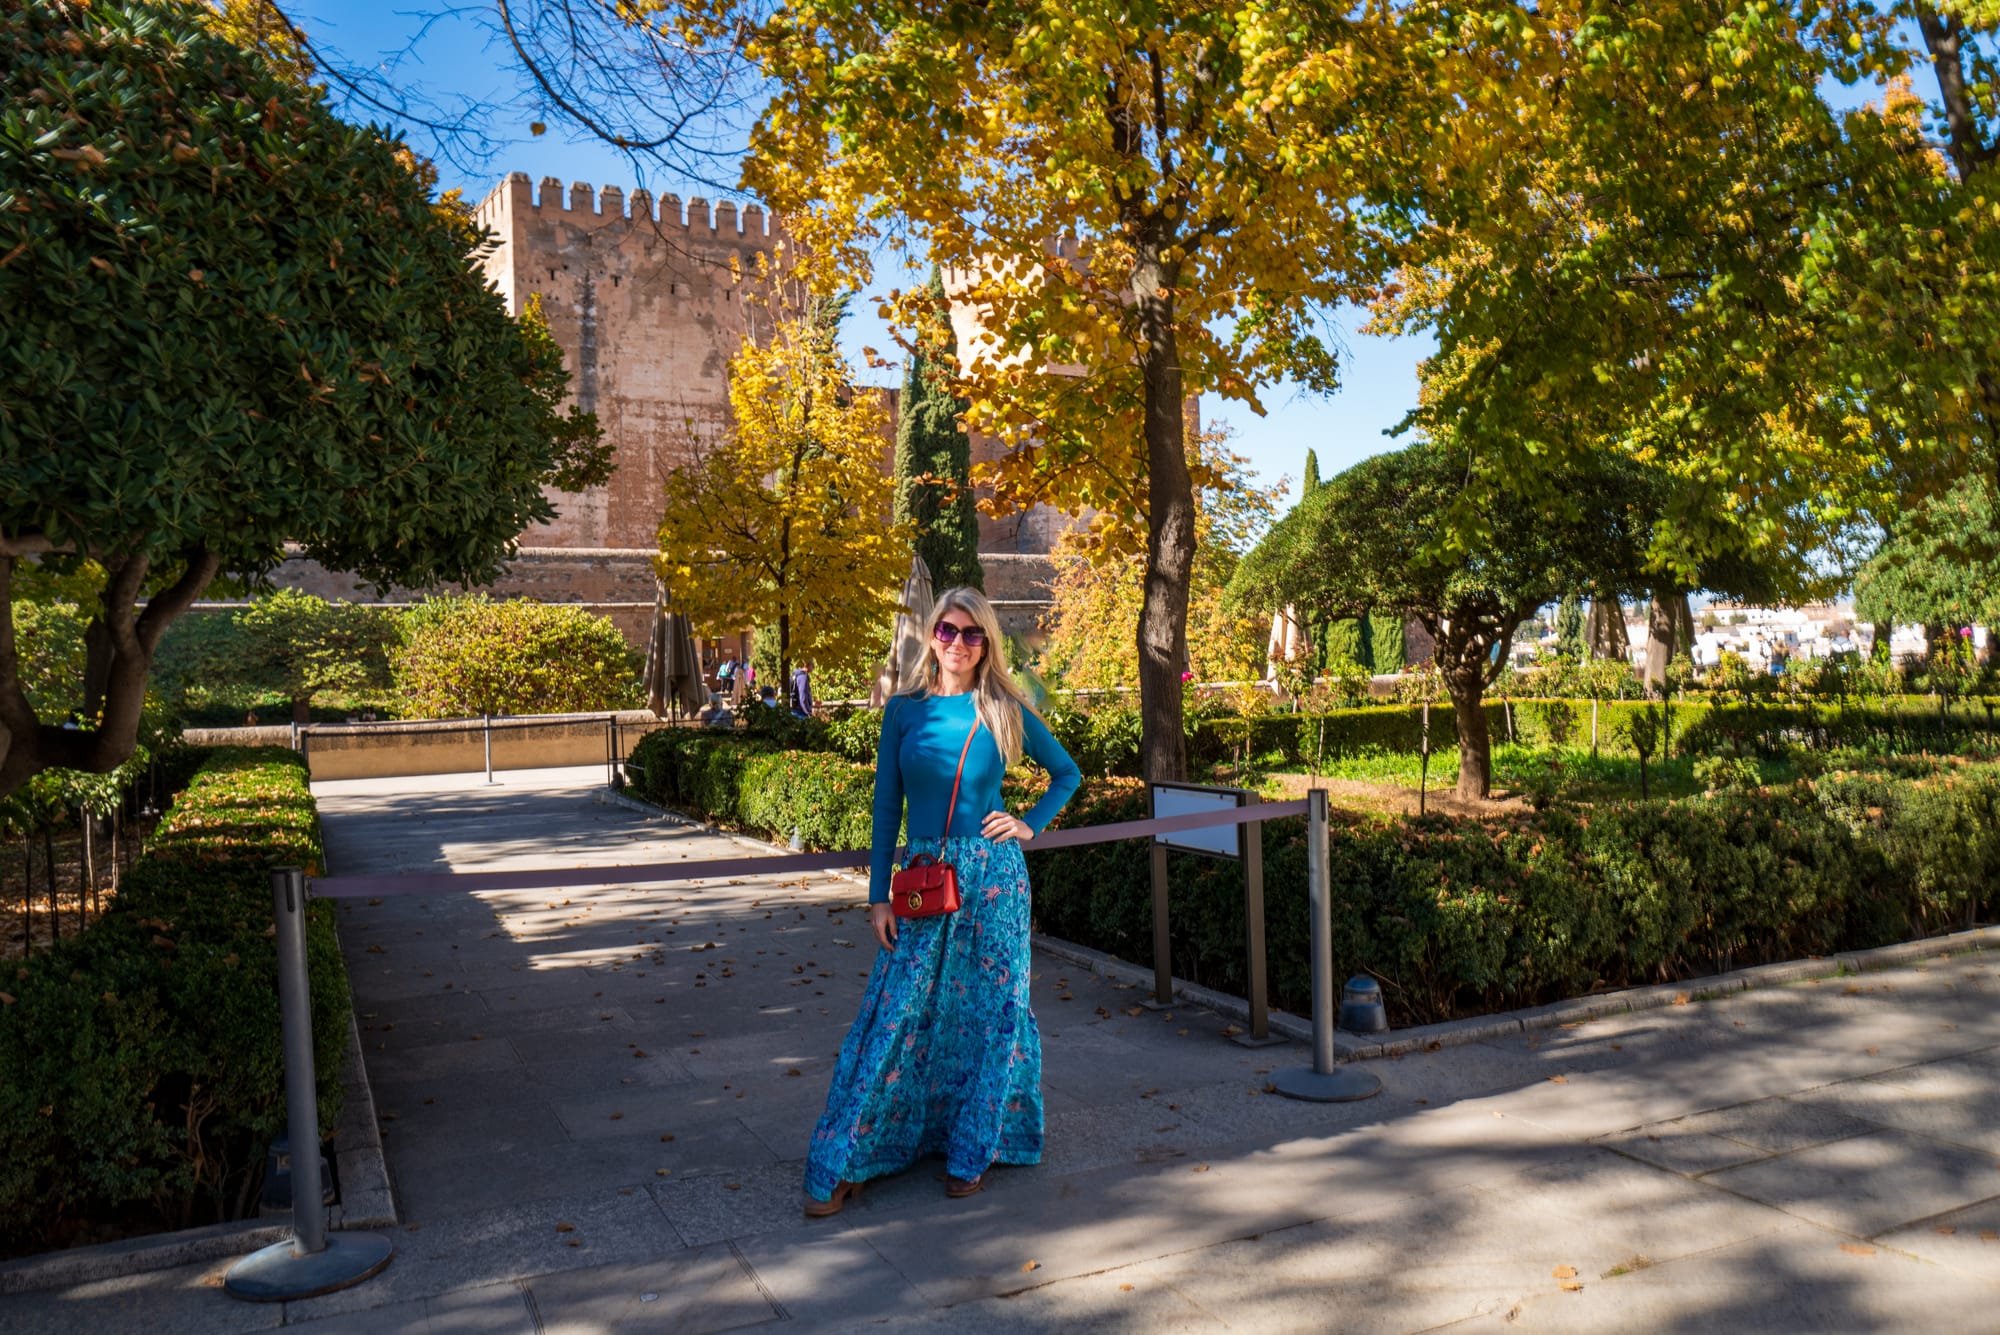 Spain 2023 Part Five: The Alhambra